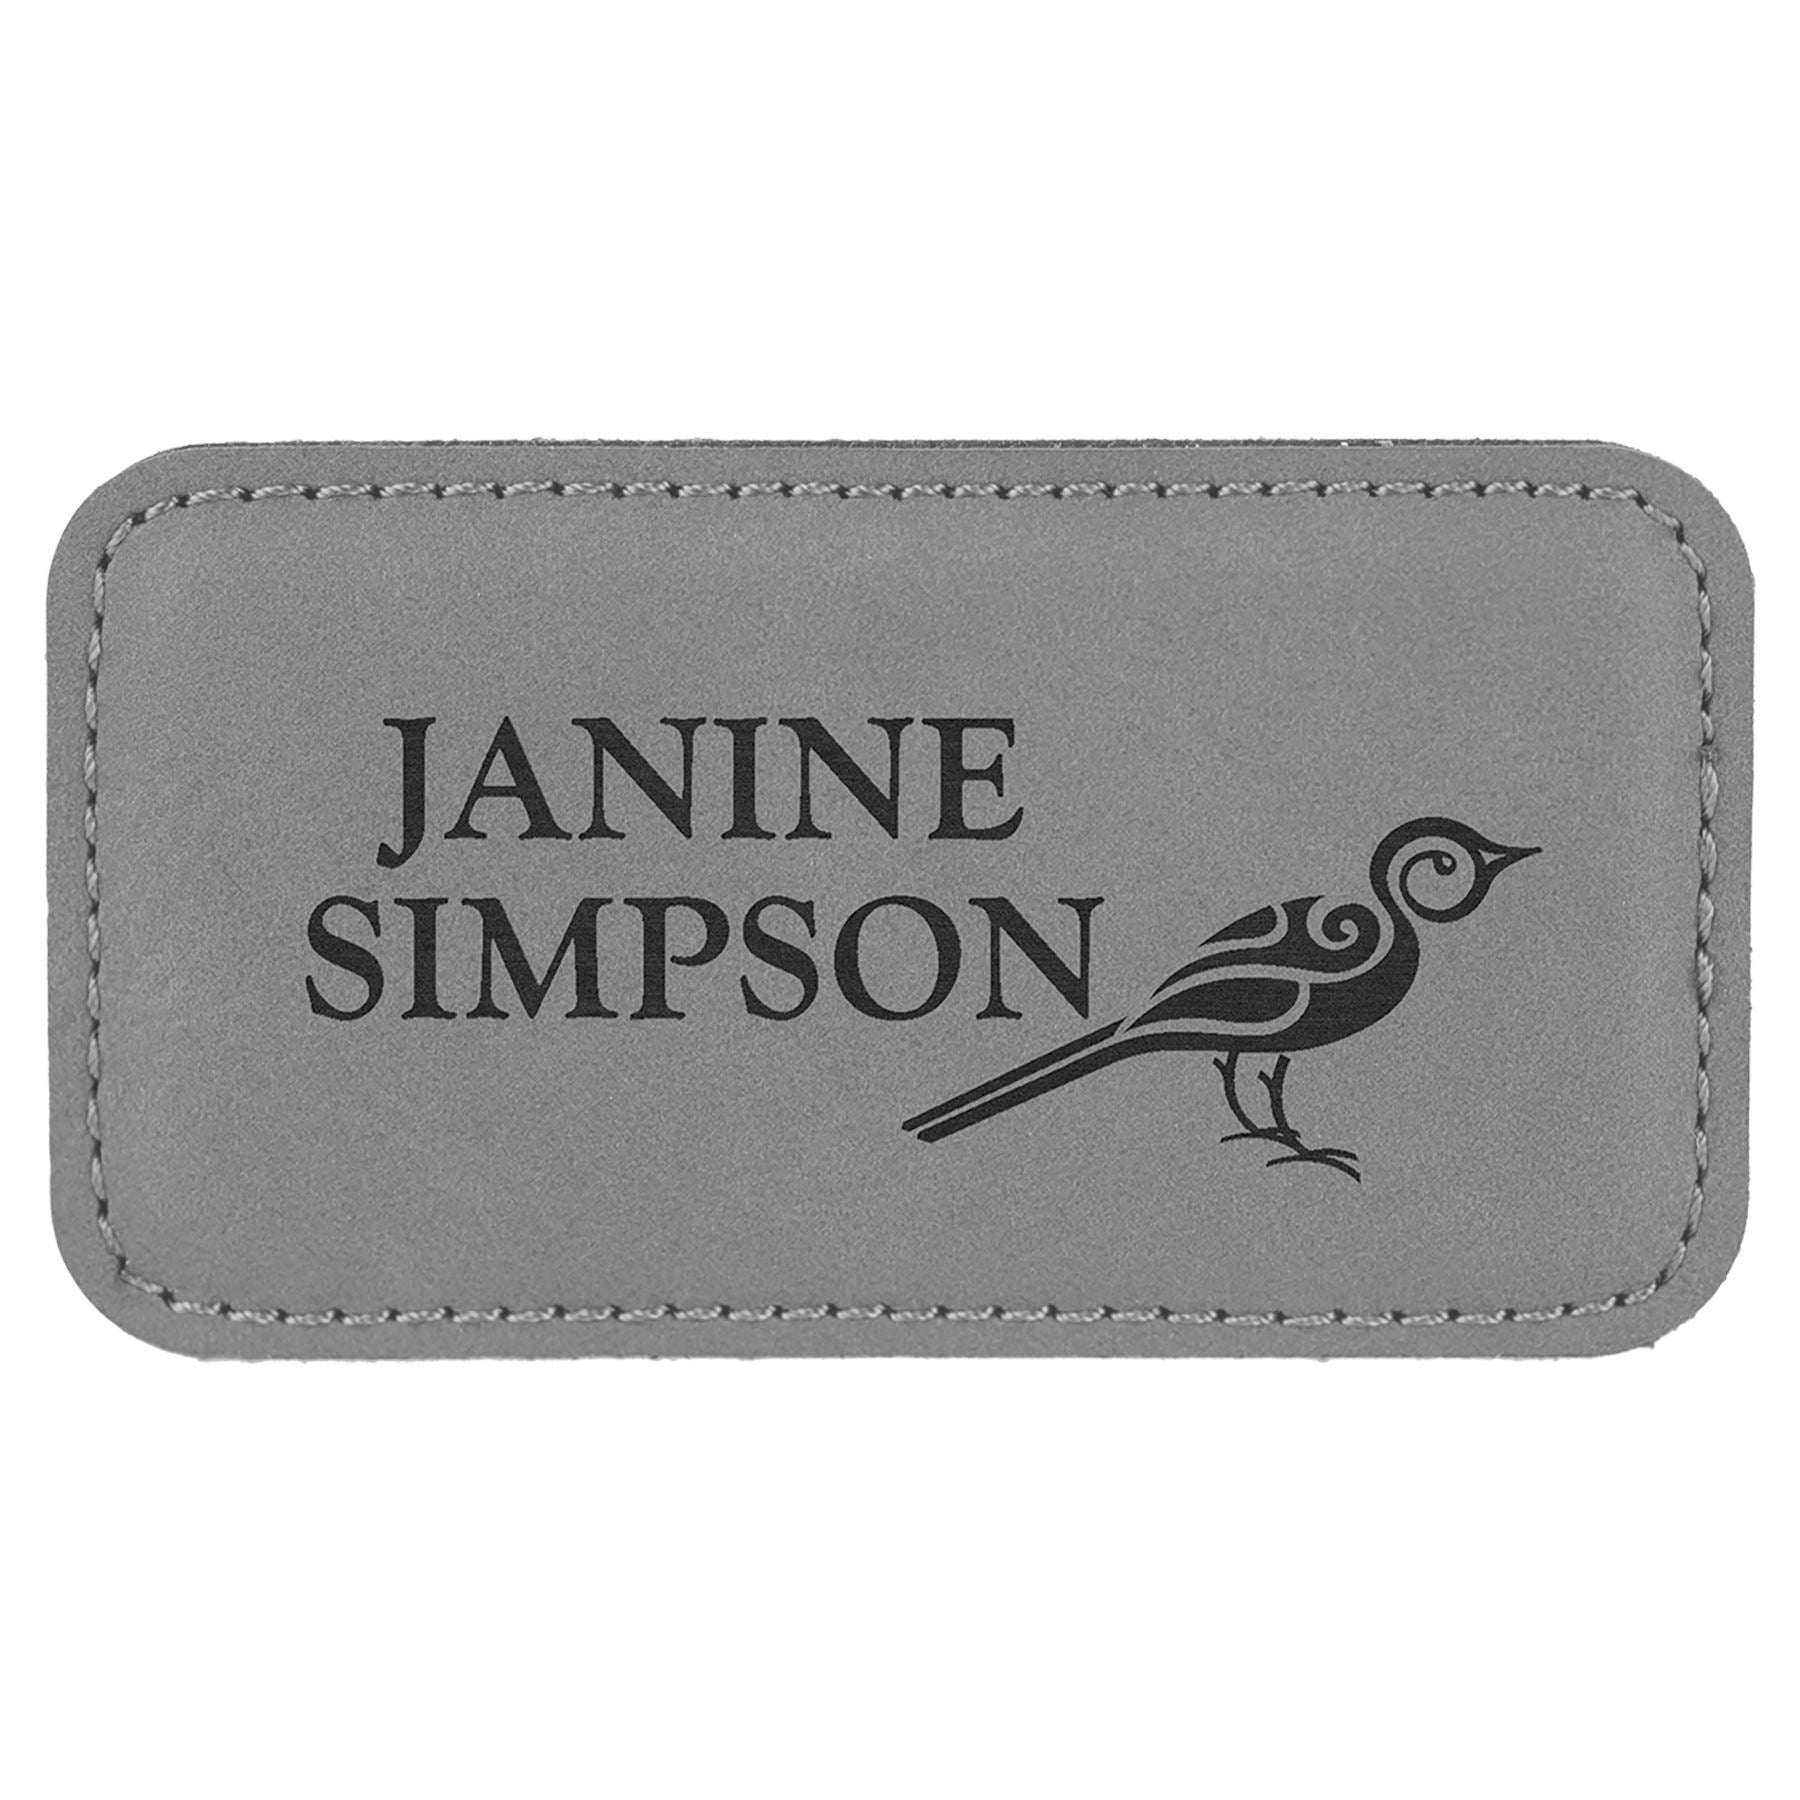 Rectangle Badge with Magnet, Laserable Leatherette 3 1/4" x 1 3/4" Name Badge Craftworks NW Gray/Black 